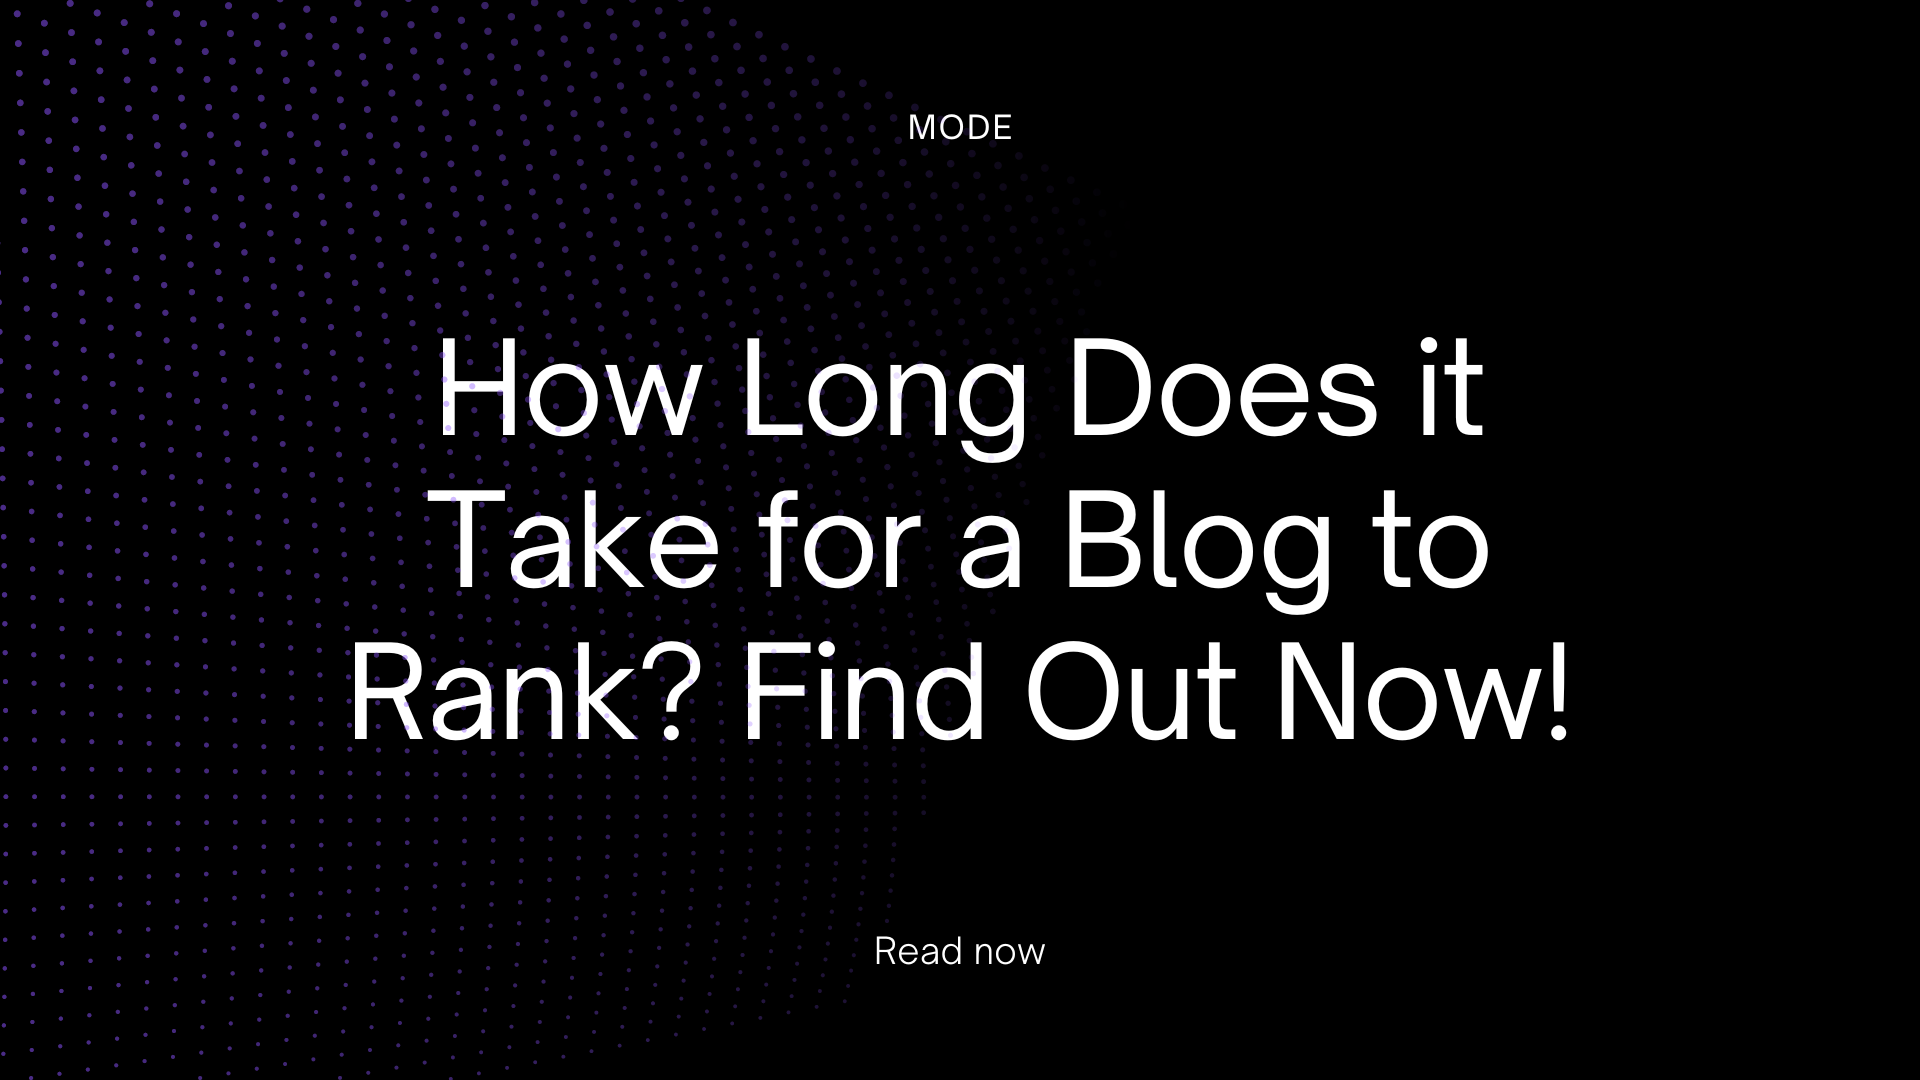 How Long Does it Take for a Blog to Rank? Find Out Now!